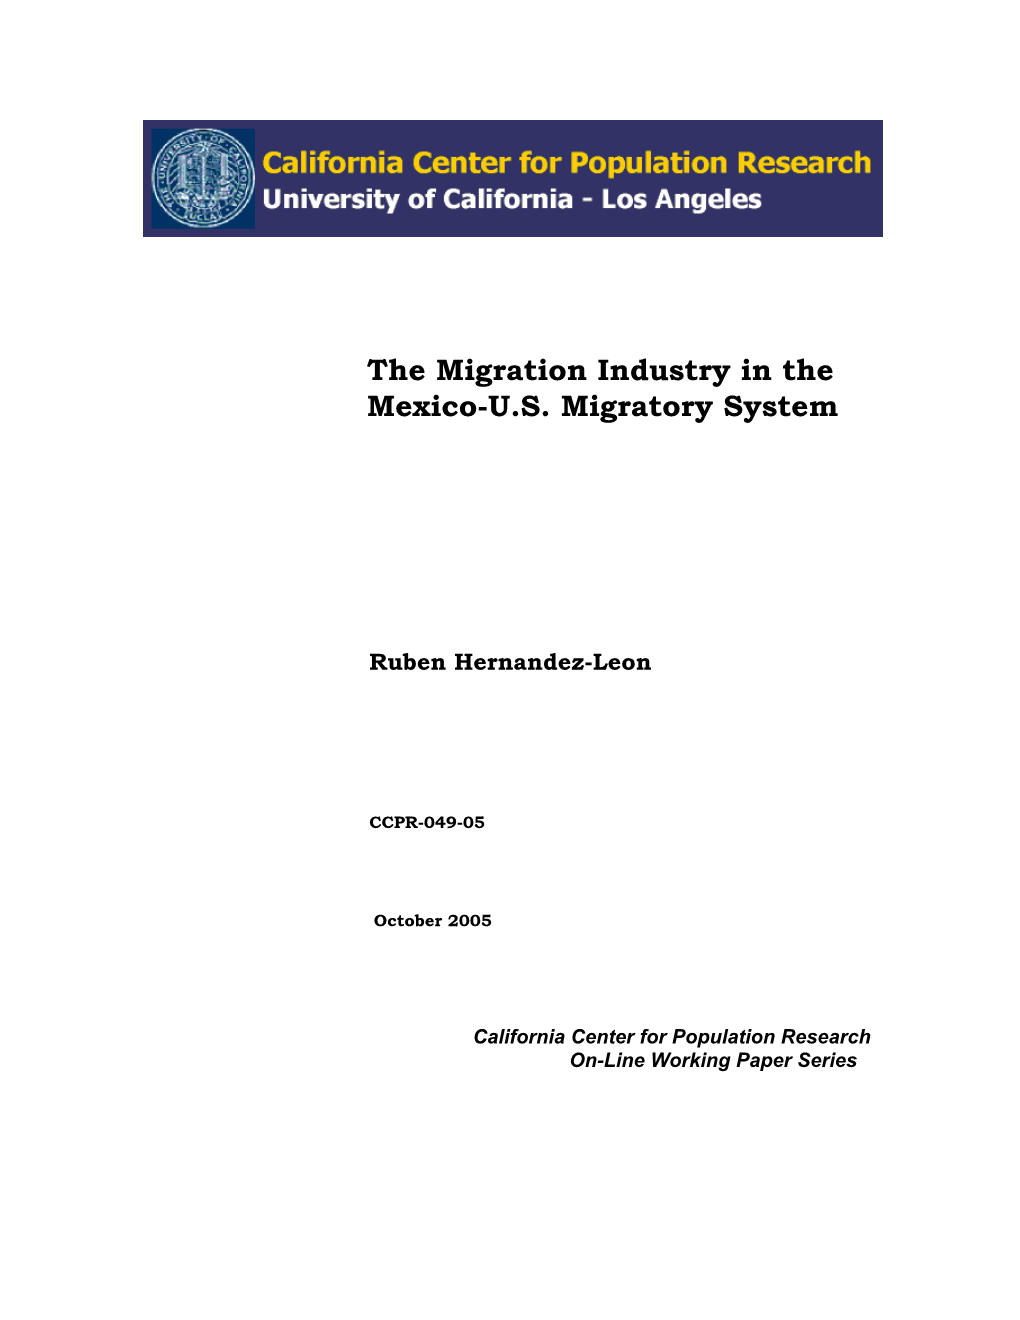 The Migration Industry and New Destinations of Mexican Migration